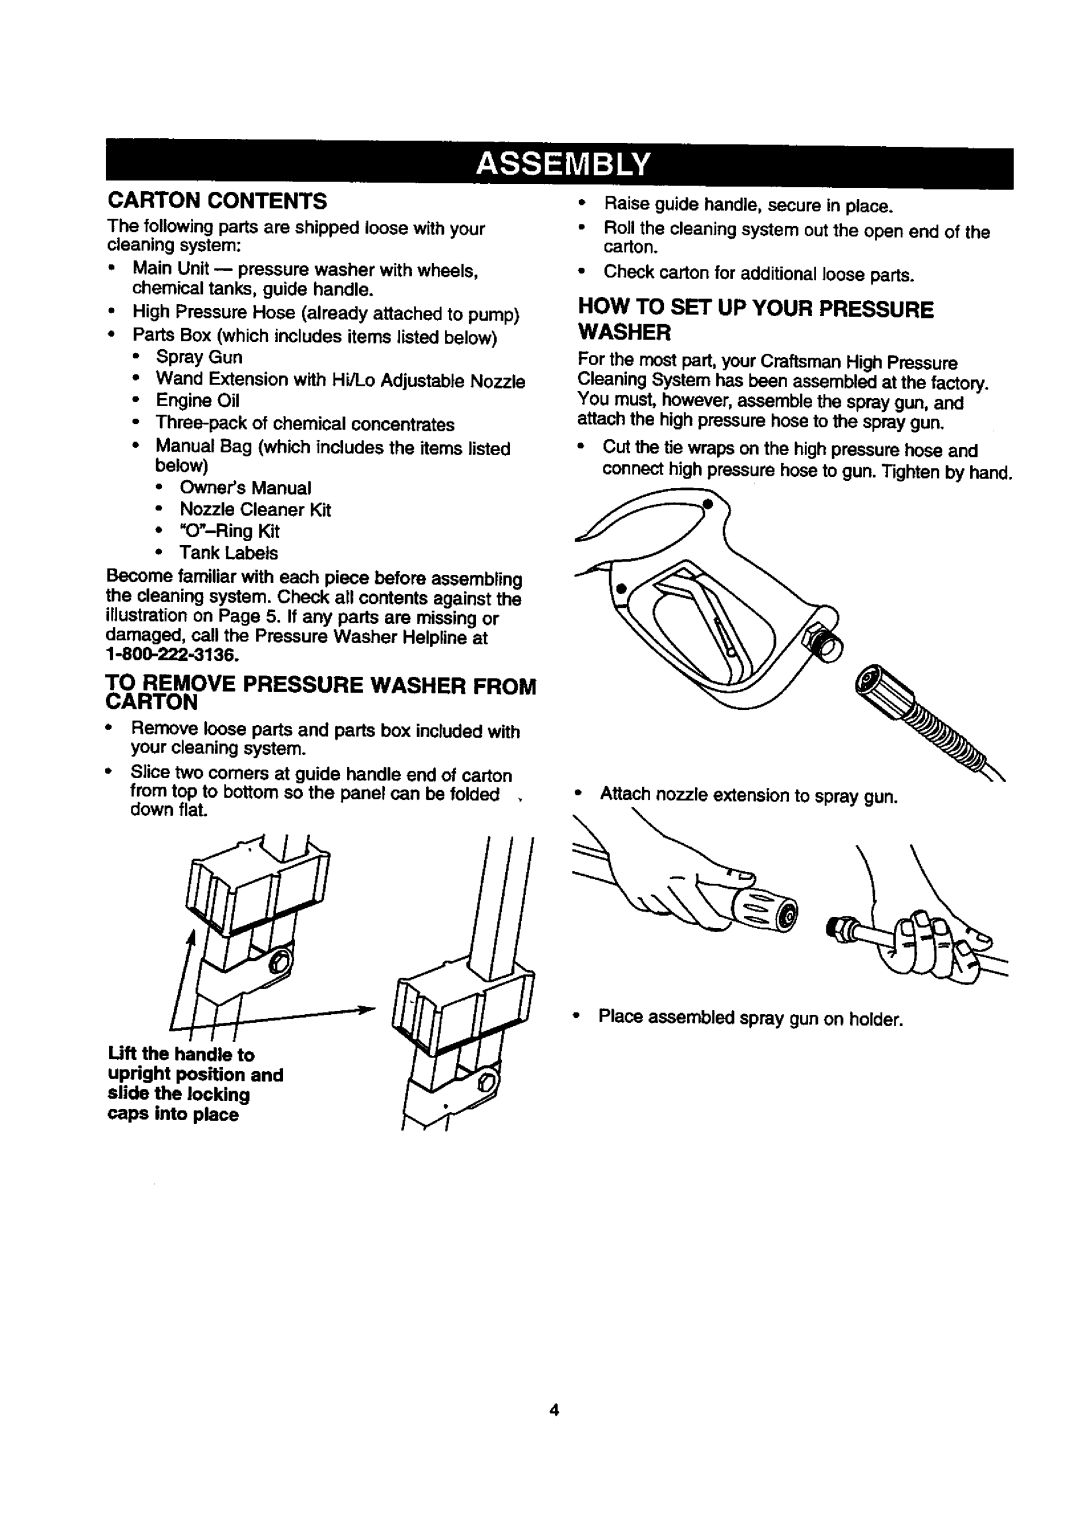 Craftsman 580.768030 Carton Contents, To Remove Pressure Washer From Carton, How To Set Up Your Pressure Washer 